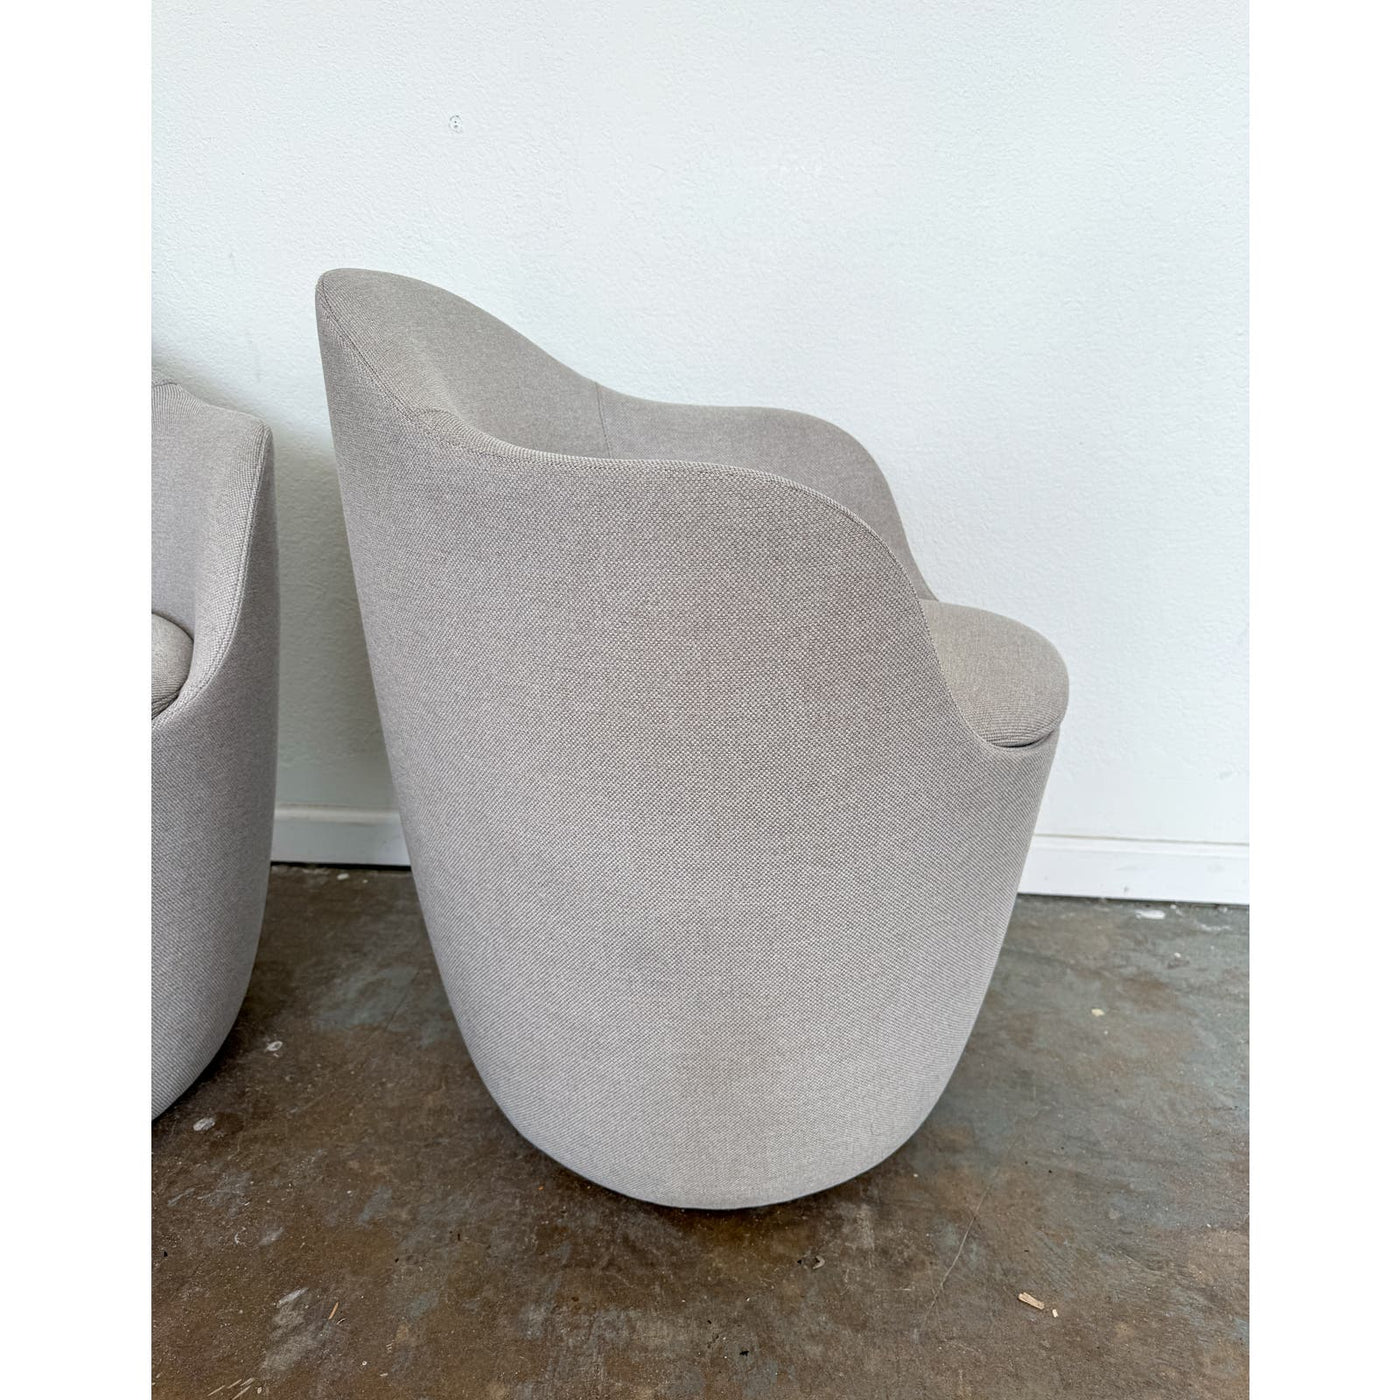 Design Within Reach Lina Swivel Chairs